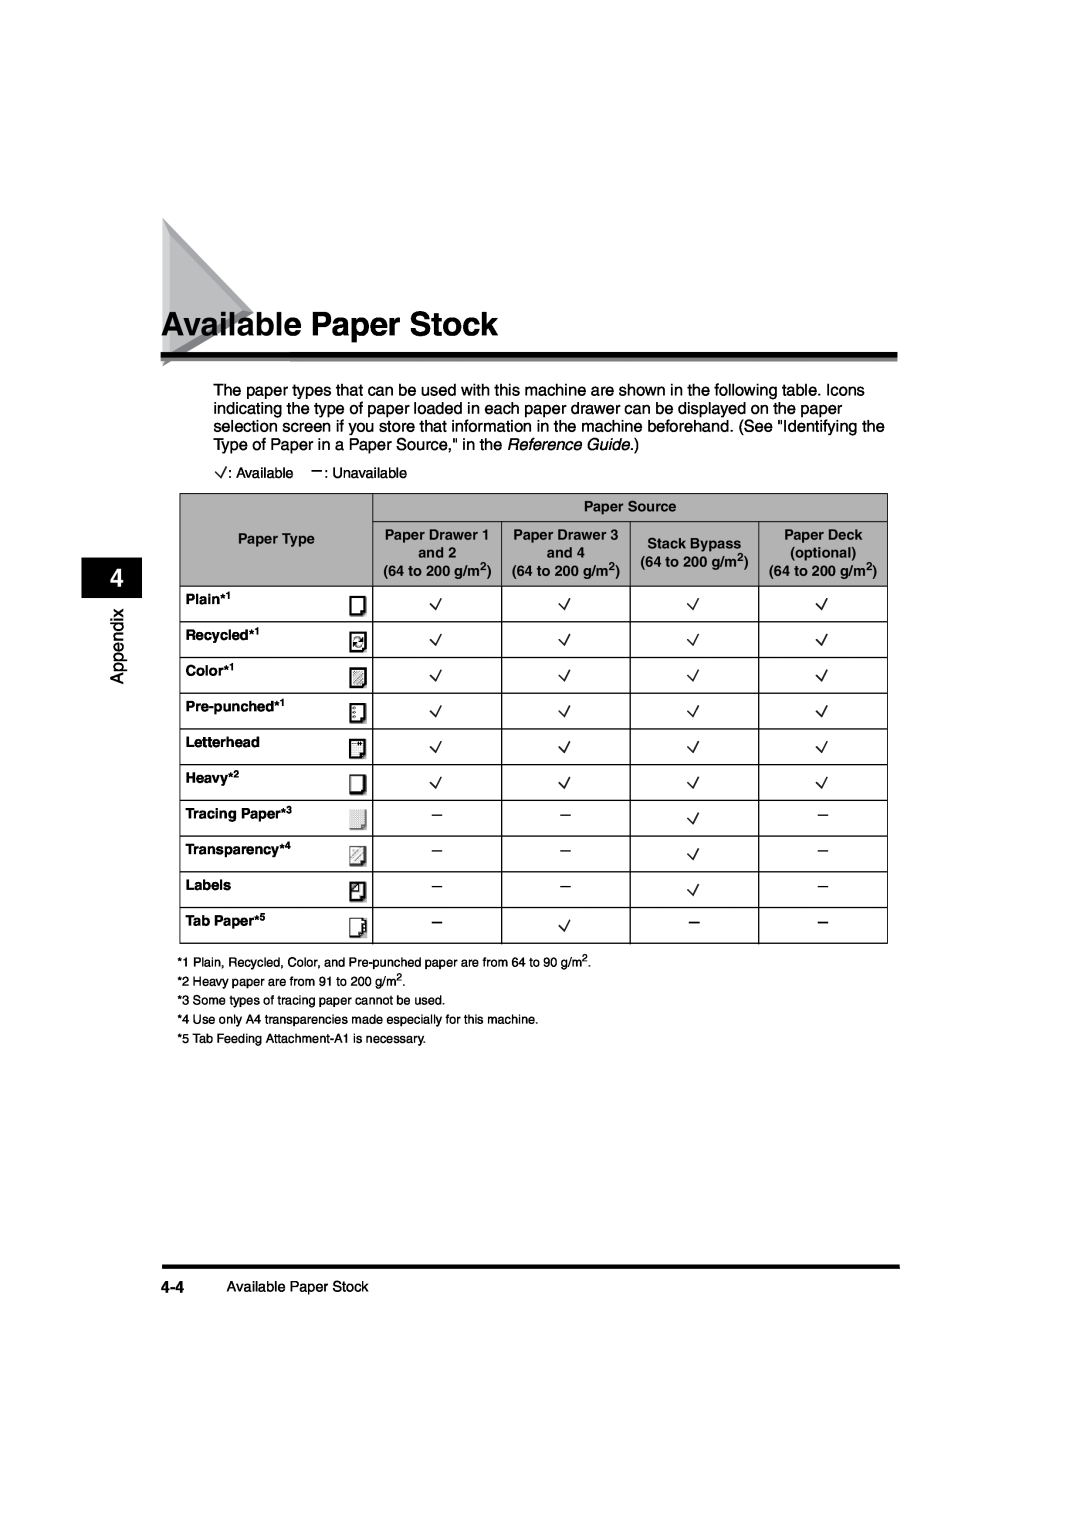 Canon iR6570 manual Available Paper Stock 